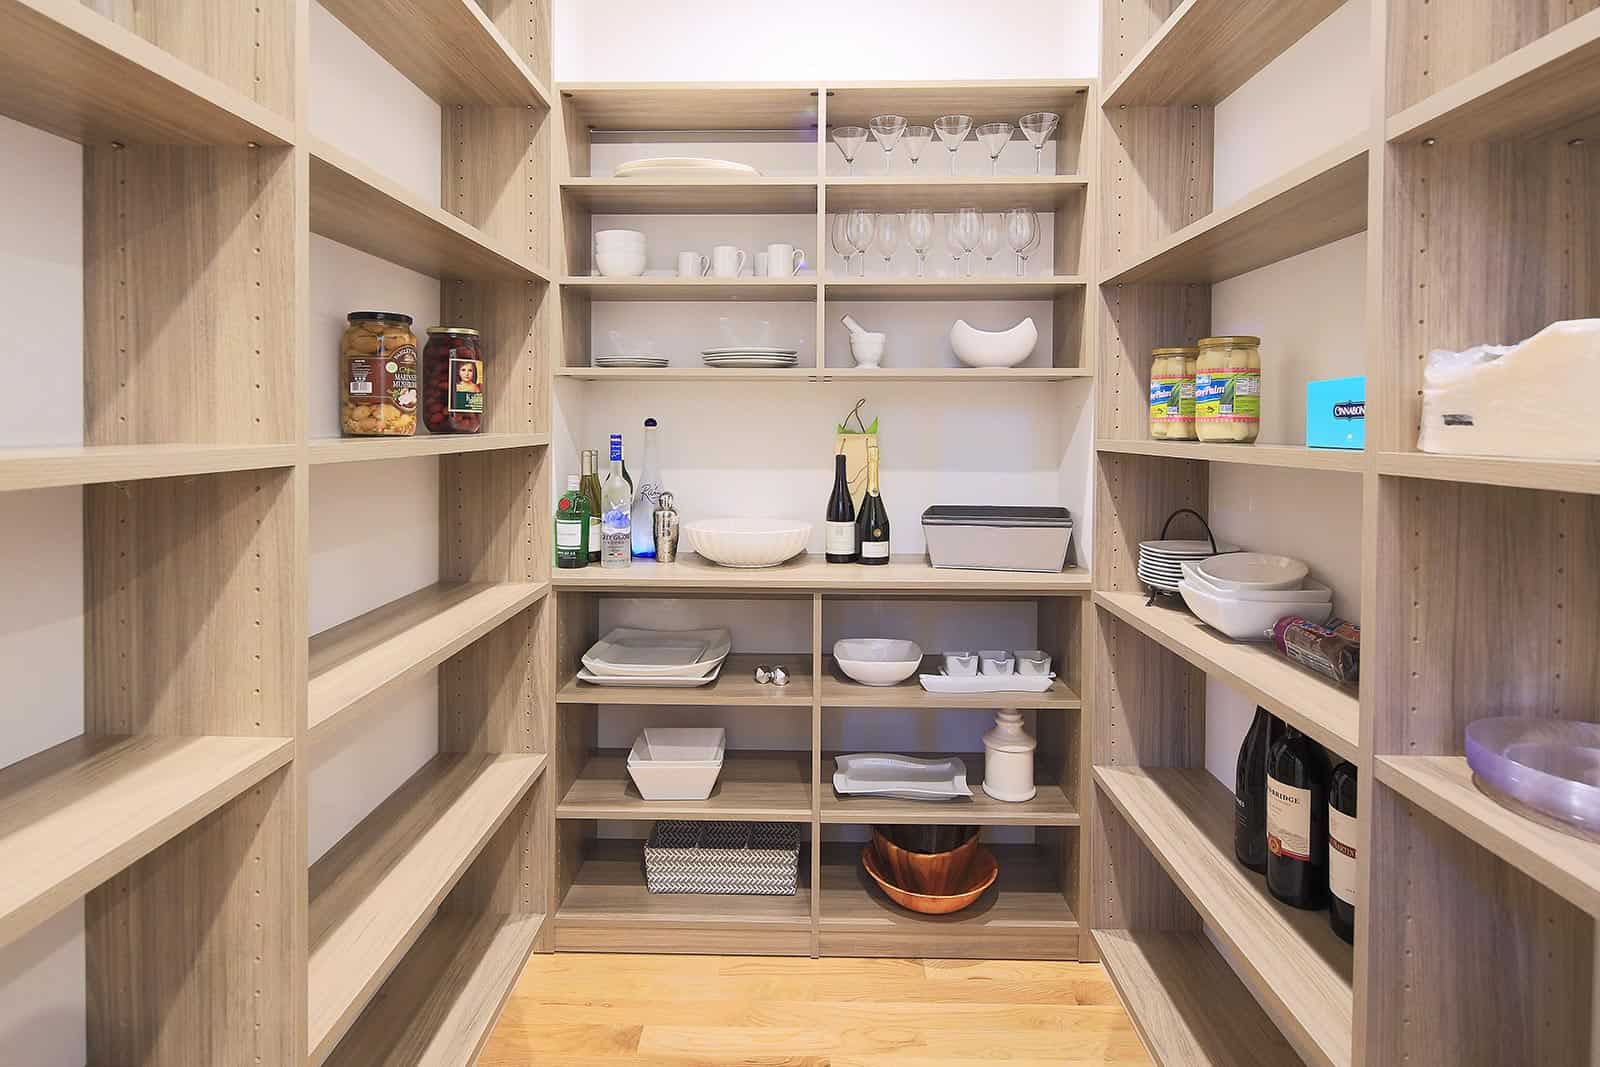 Pantry Storage Solutions Ina, What Wood Should I Use For Pantry Shelves